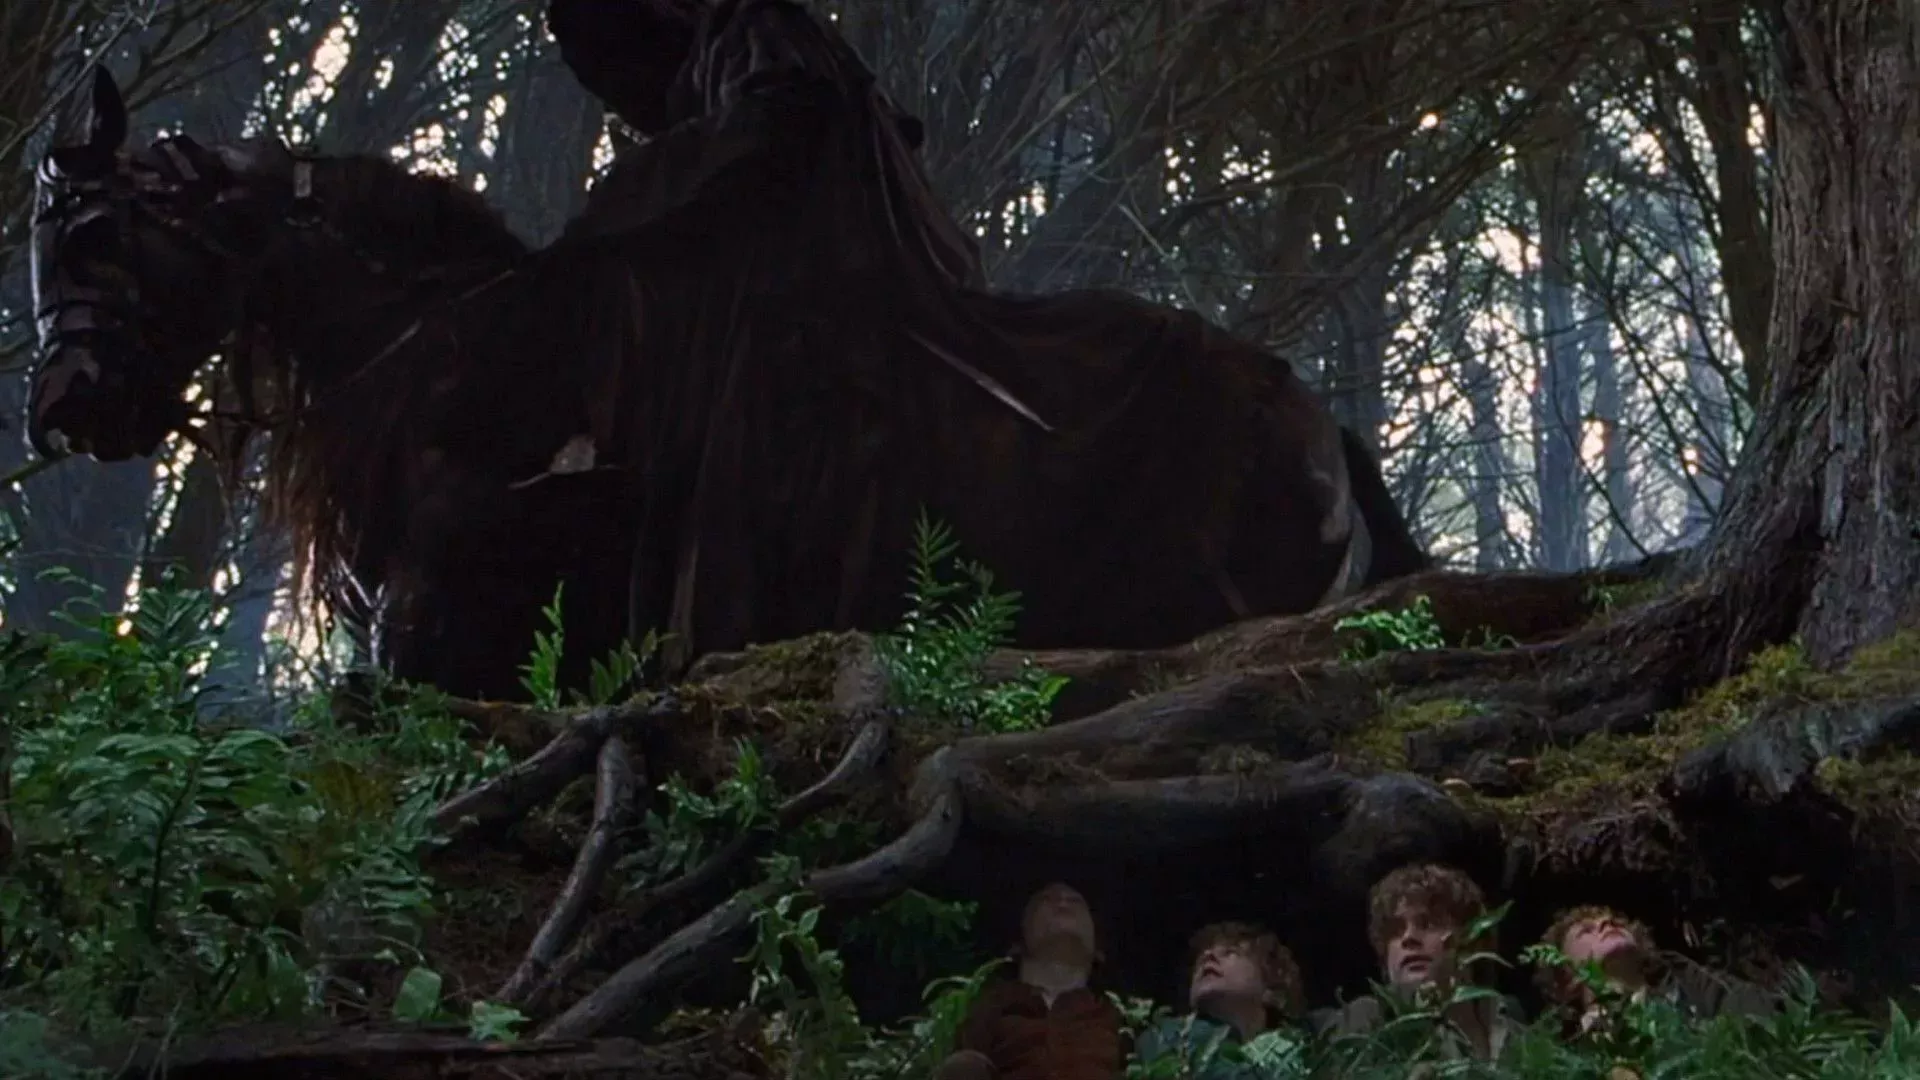 The Hobbits hide from the Nazgul in The Fellowship of the Ring